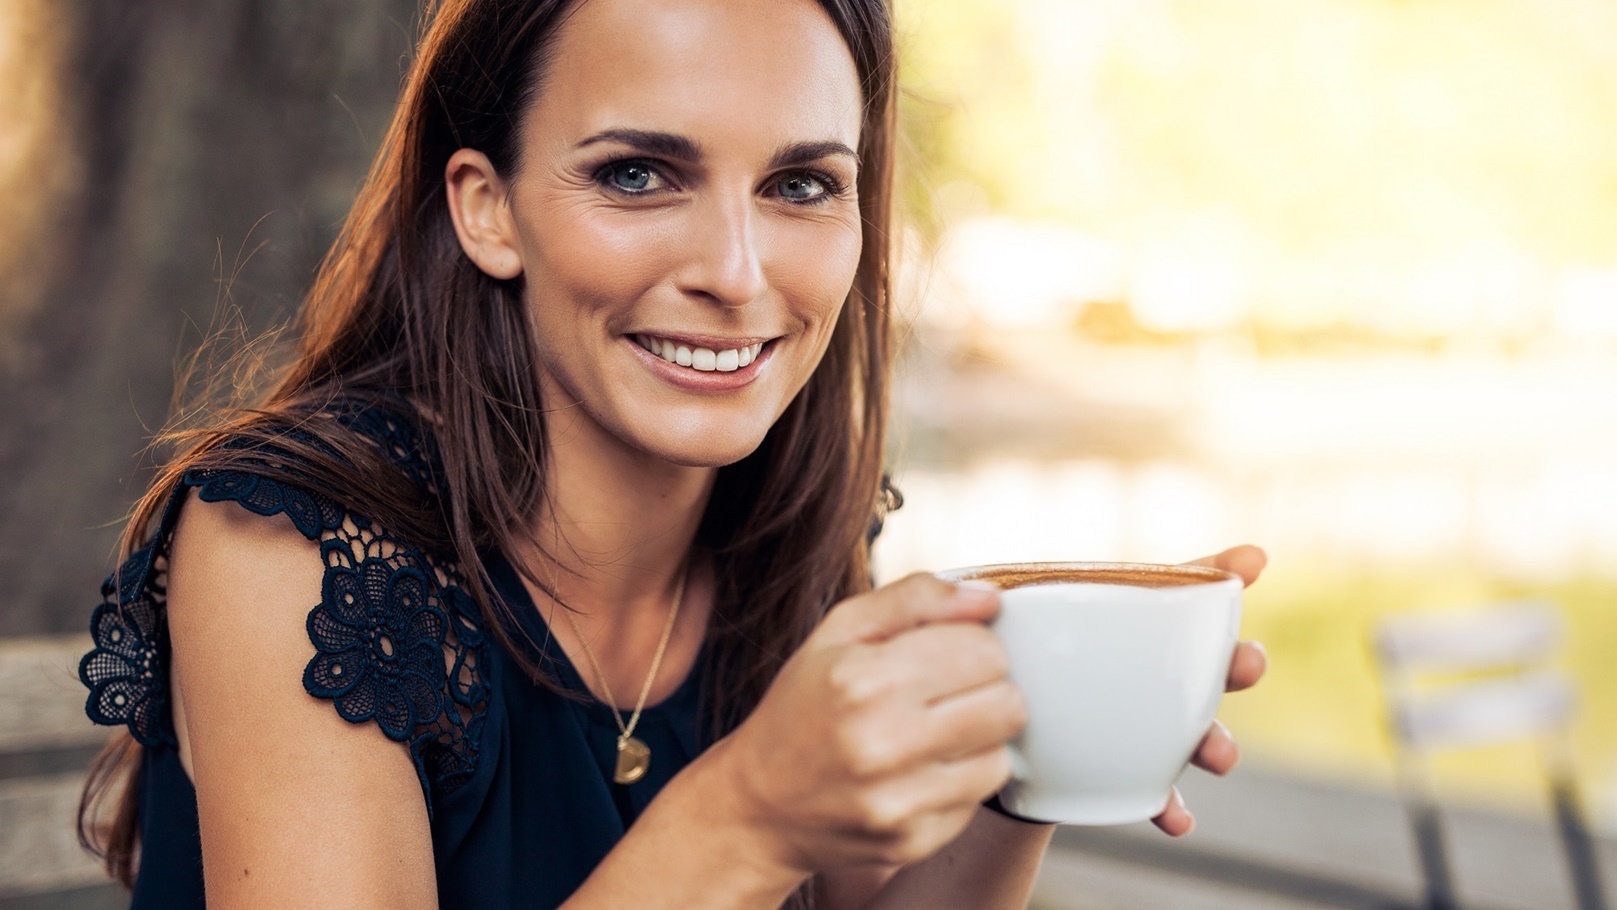 smiling-young-woman-with-a-cup-of-coffee-2021-08-26-19-58-03-utc